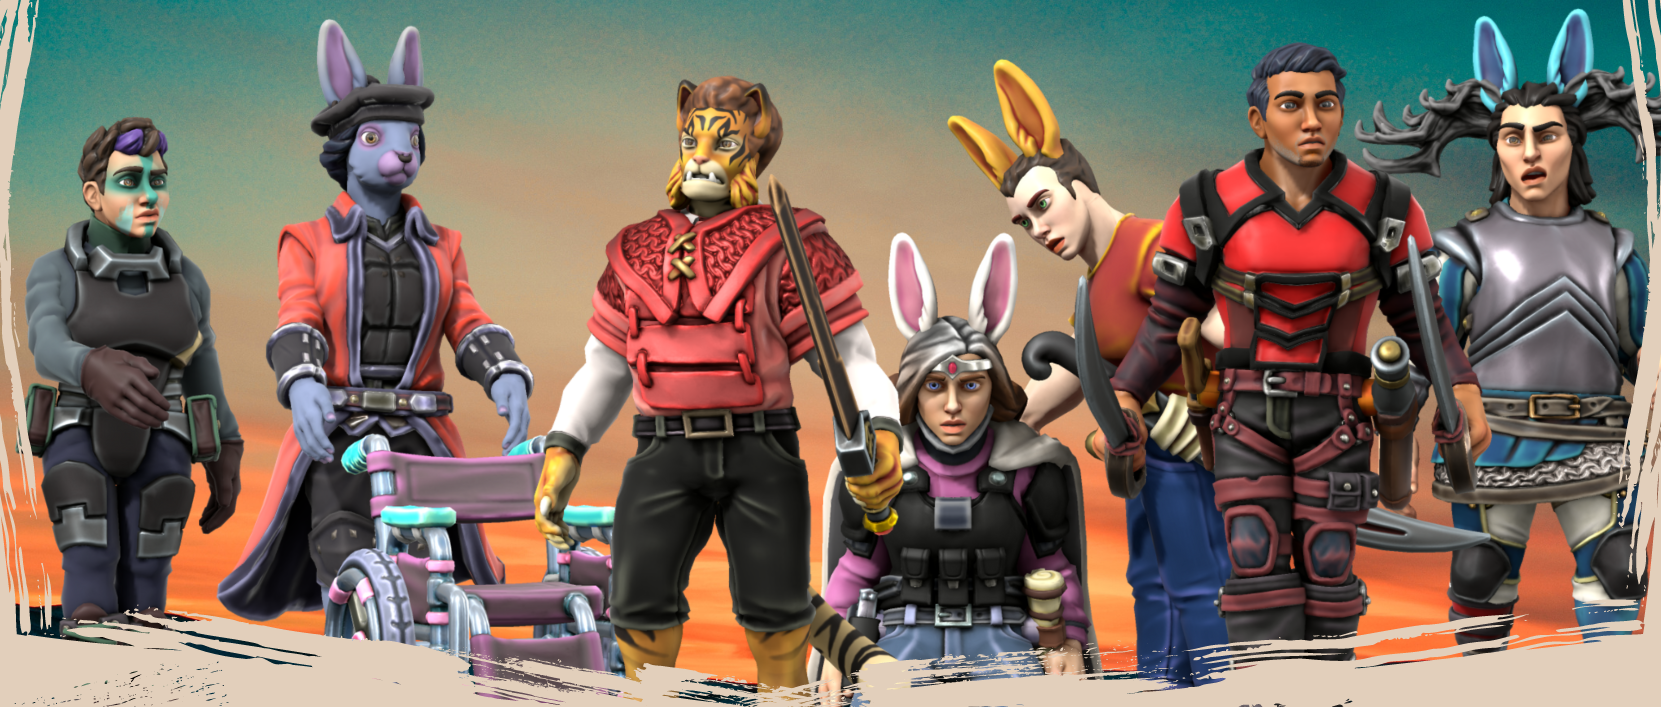 Humans, people with bunny ears and an anthropomorphic tiger gather around a woman with bunny ears who has collapsed with concerned expressions. An anthropomorphic rabbit brings a wheelchair.